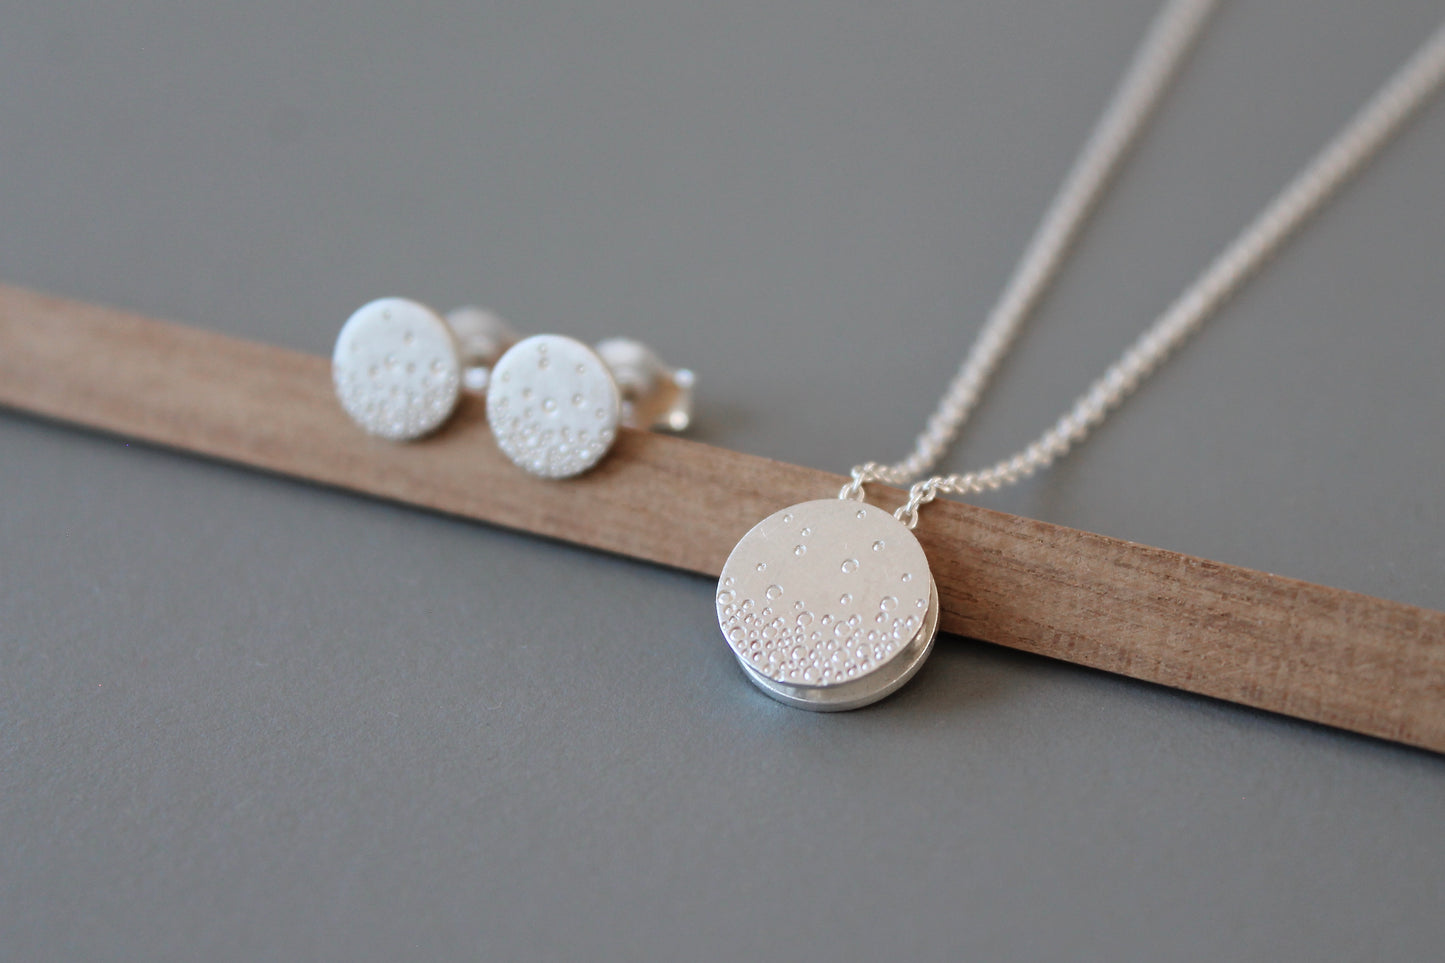 Tiny minimalist necklace in sterling silver with bubbles design